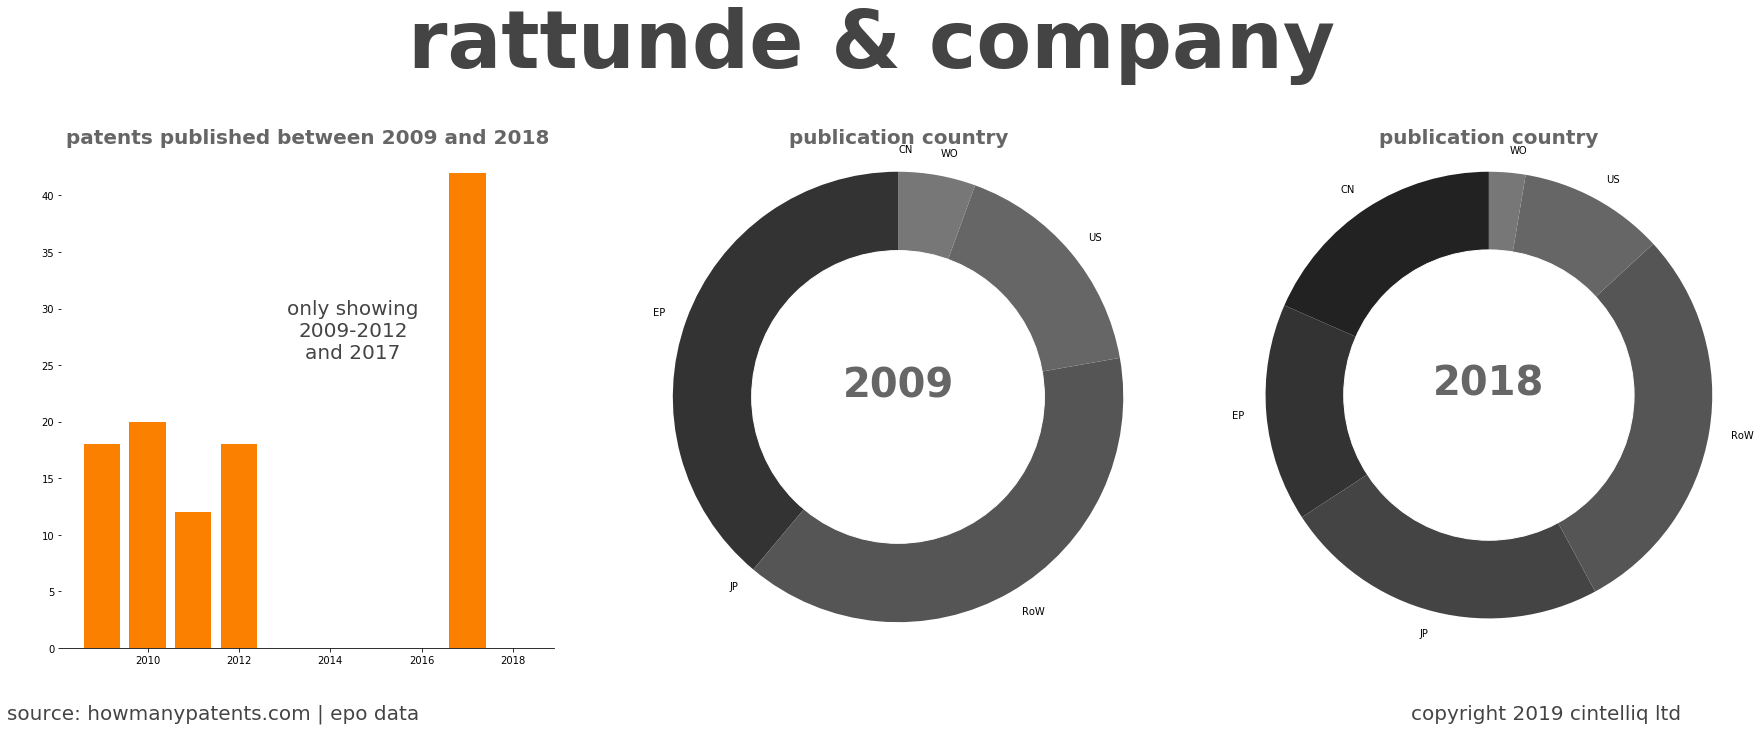 summary of patents for Rattunde & Company